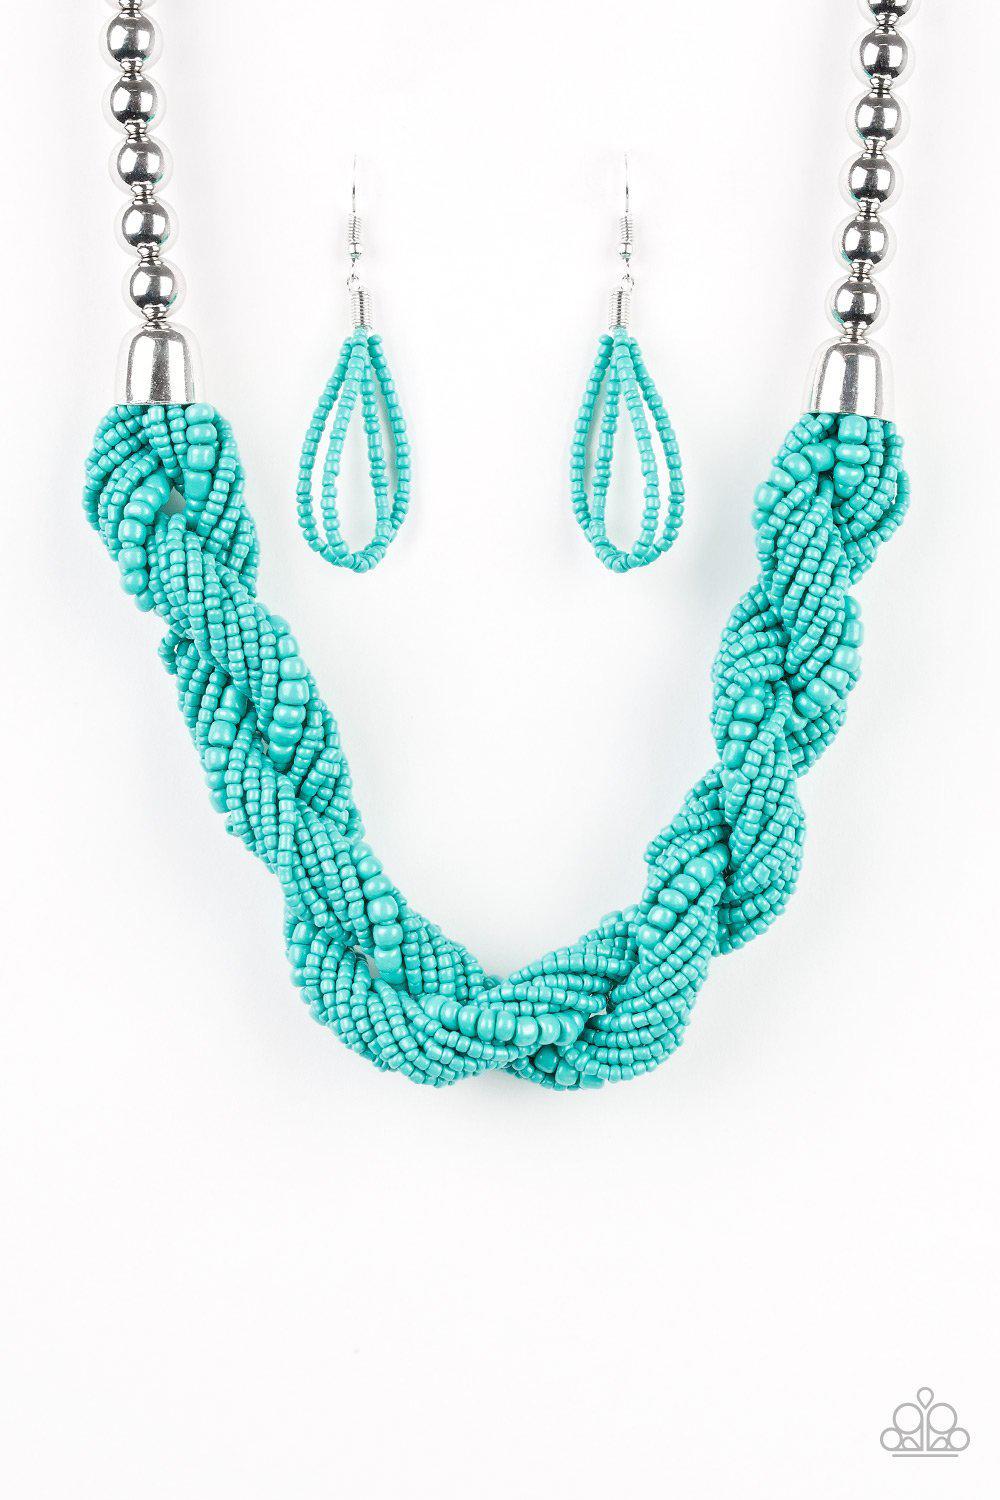 Savannah Surfin' Turquoise Blue Seed Bead Necklace and matching Earrings - Paparazzi Accessories-CarasShop.com - $5 Jewelry by Cara Jewels